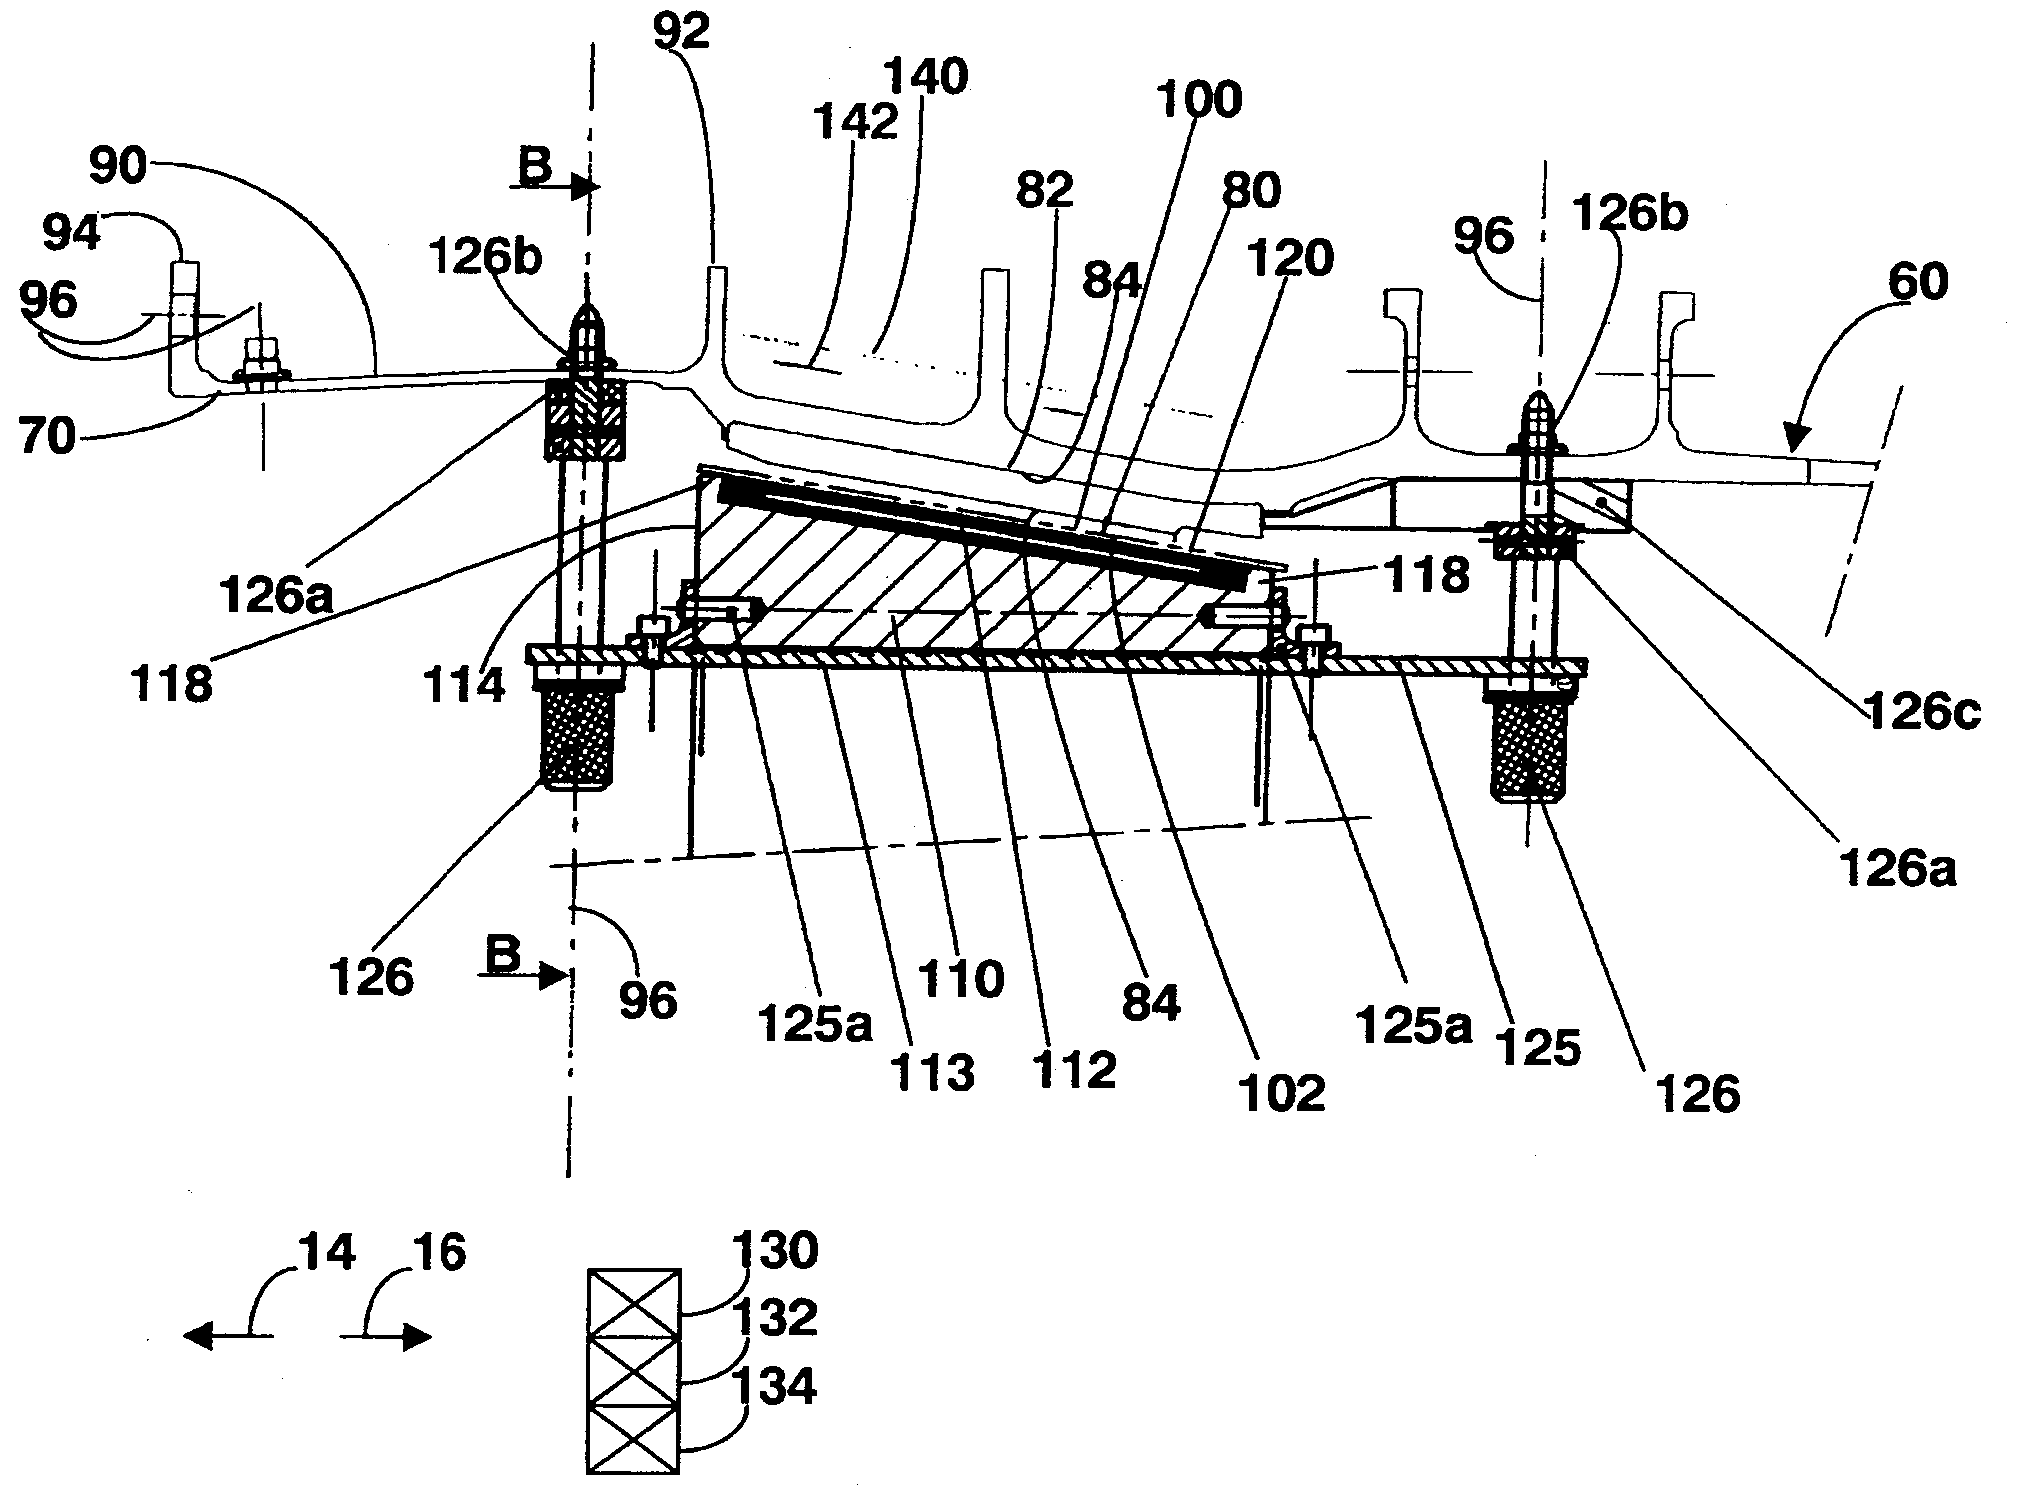 Method of replacing an abradable portion on the casing on a turbojet fan